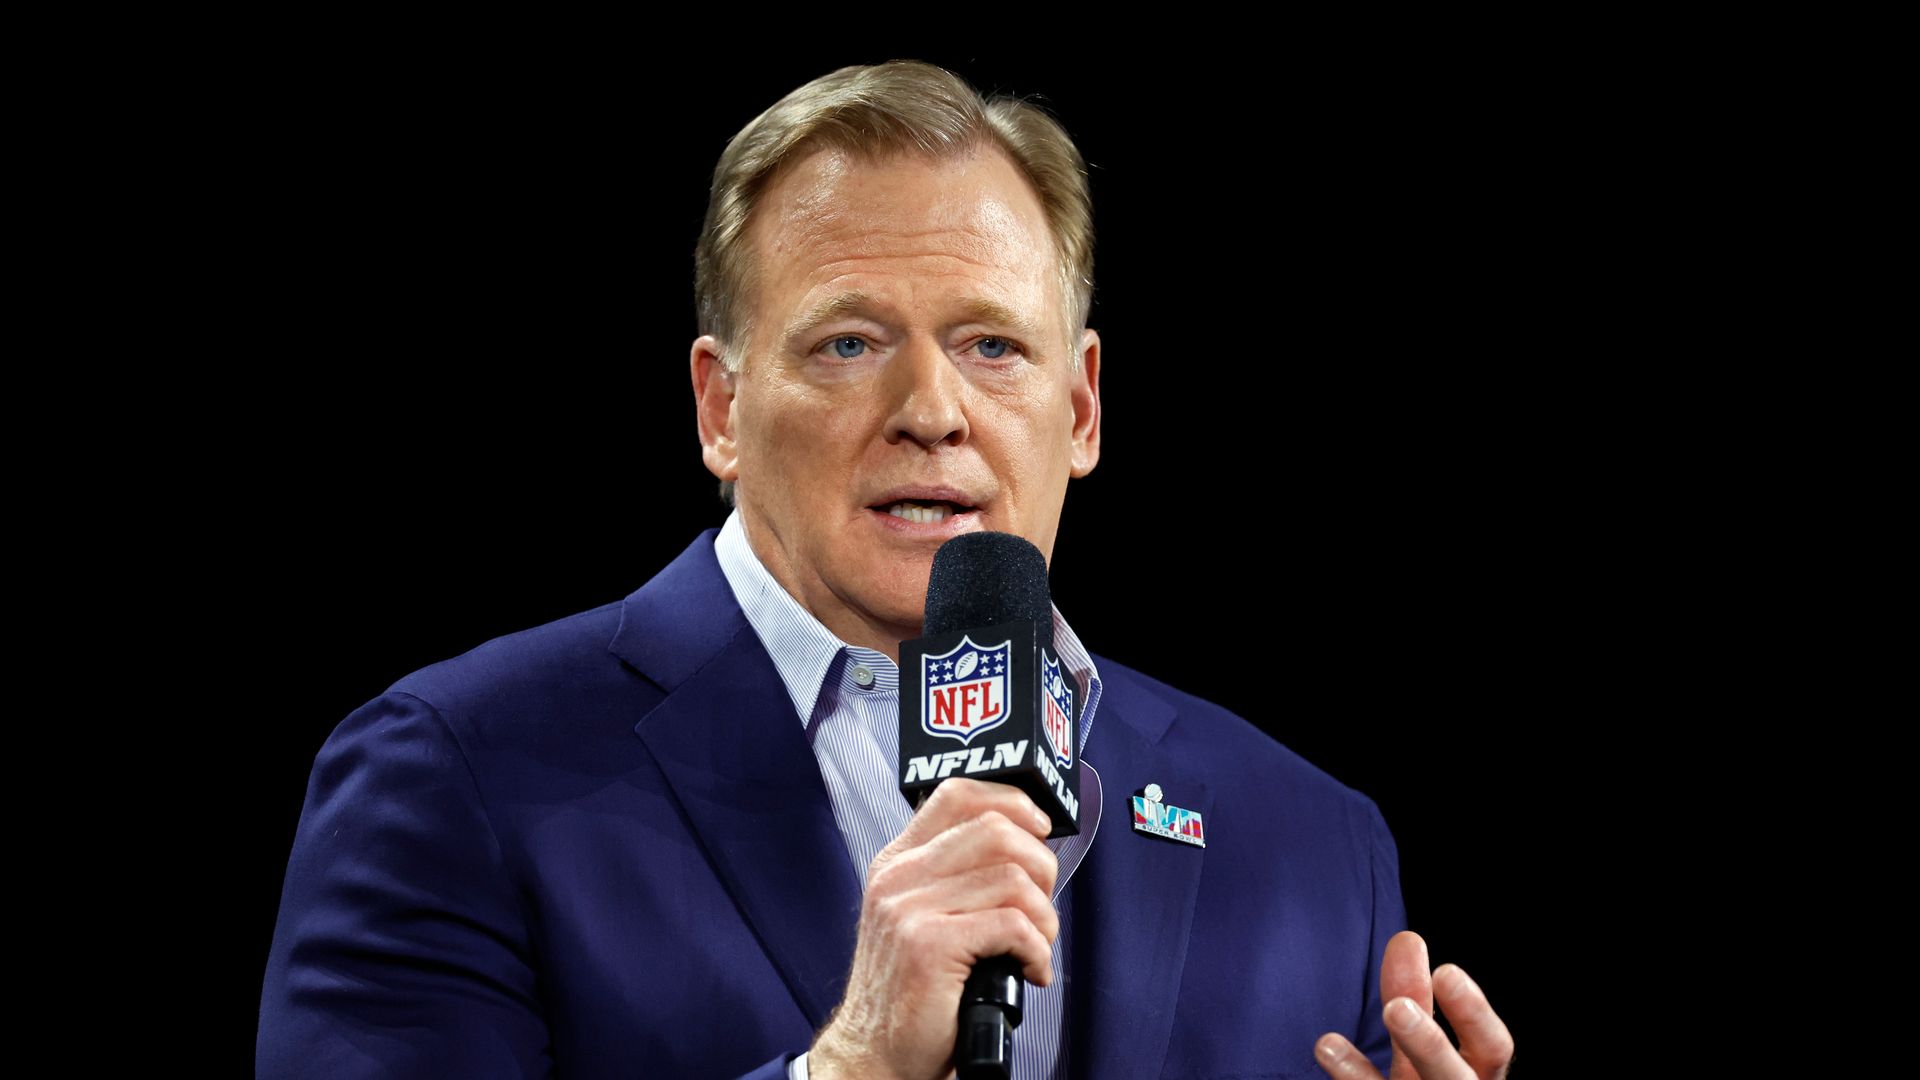 NFL Commissioner Goodell extends contract until March 2027